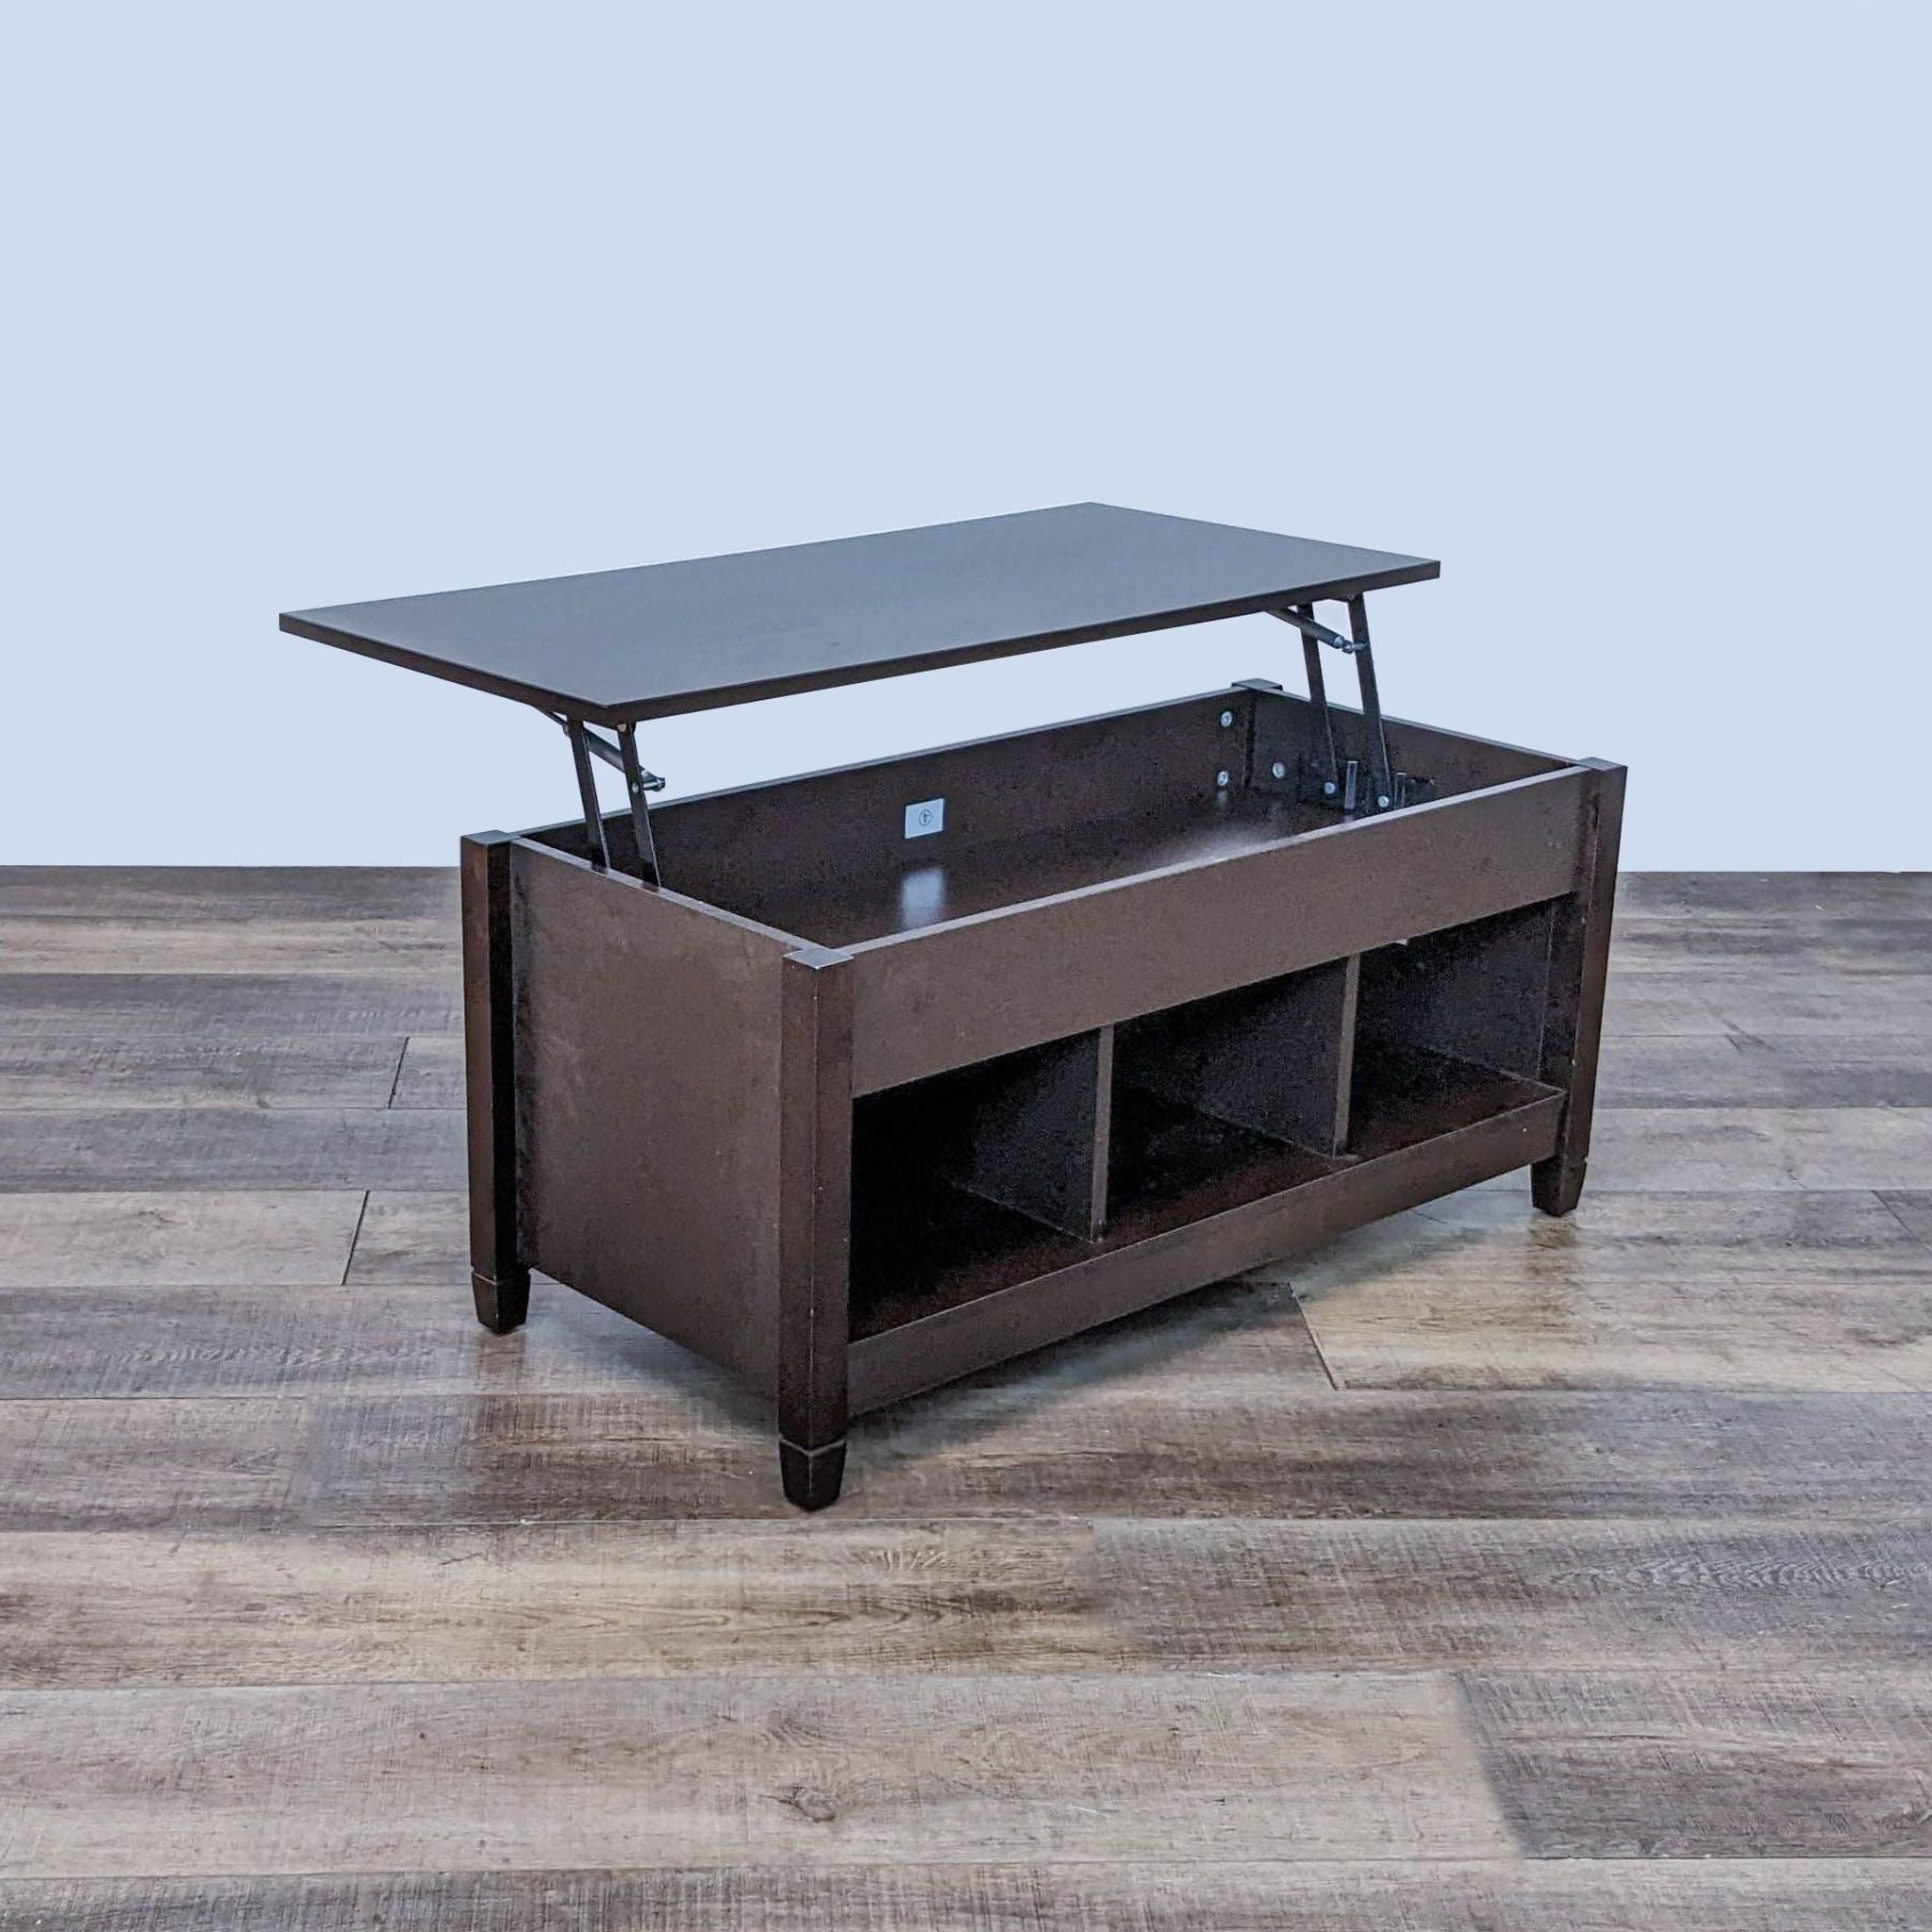 1. "Reperch coffee table with a dark finish, lower shelf, and simple design on a wooden floor."